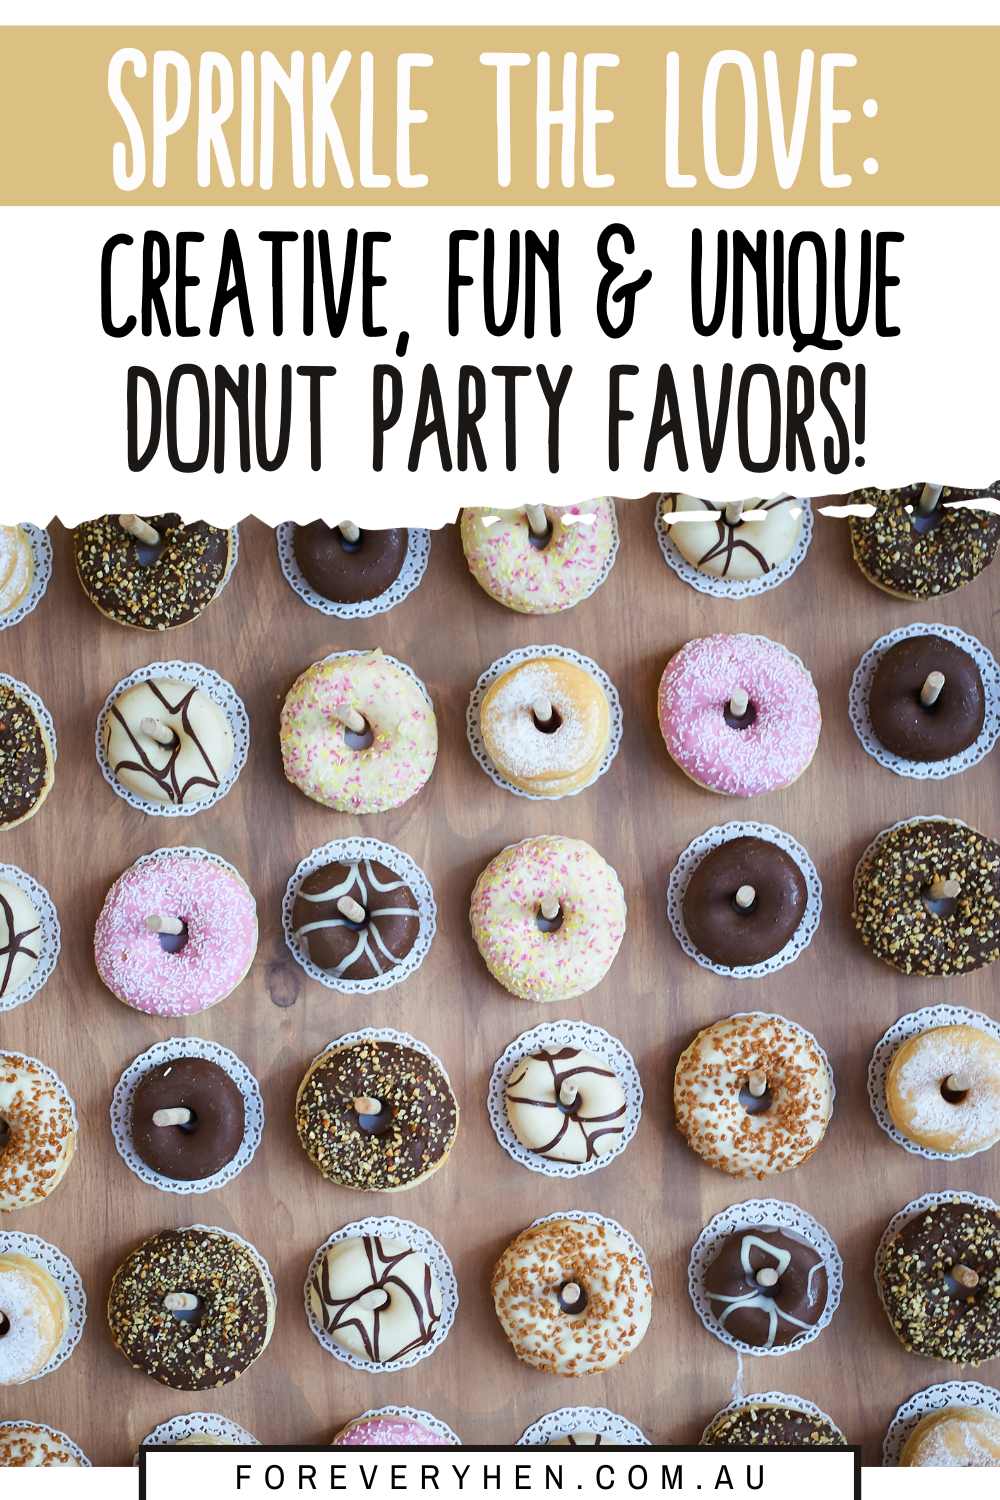 Image of a donut wall. Text overlay: Sprinkle the love - creative, fun and unique donut party favors!